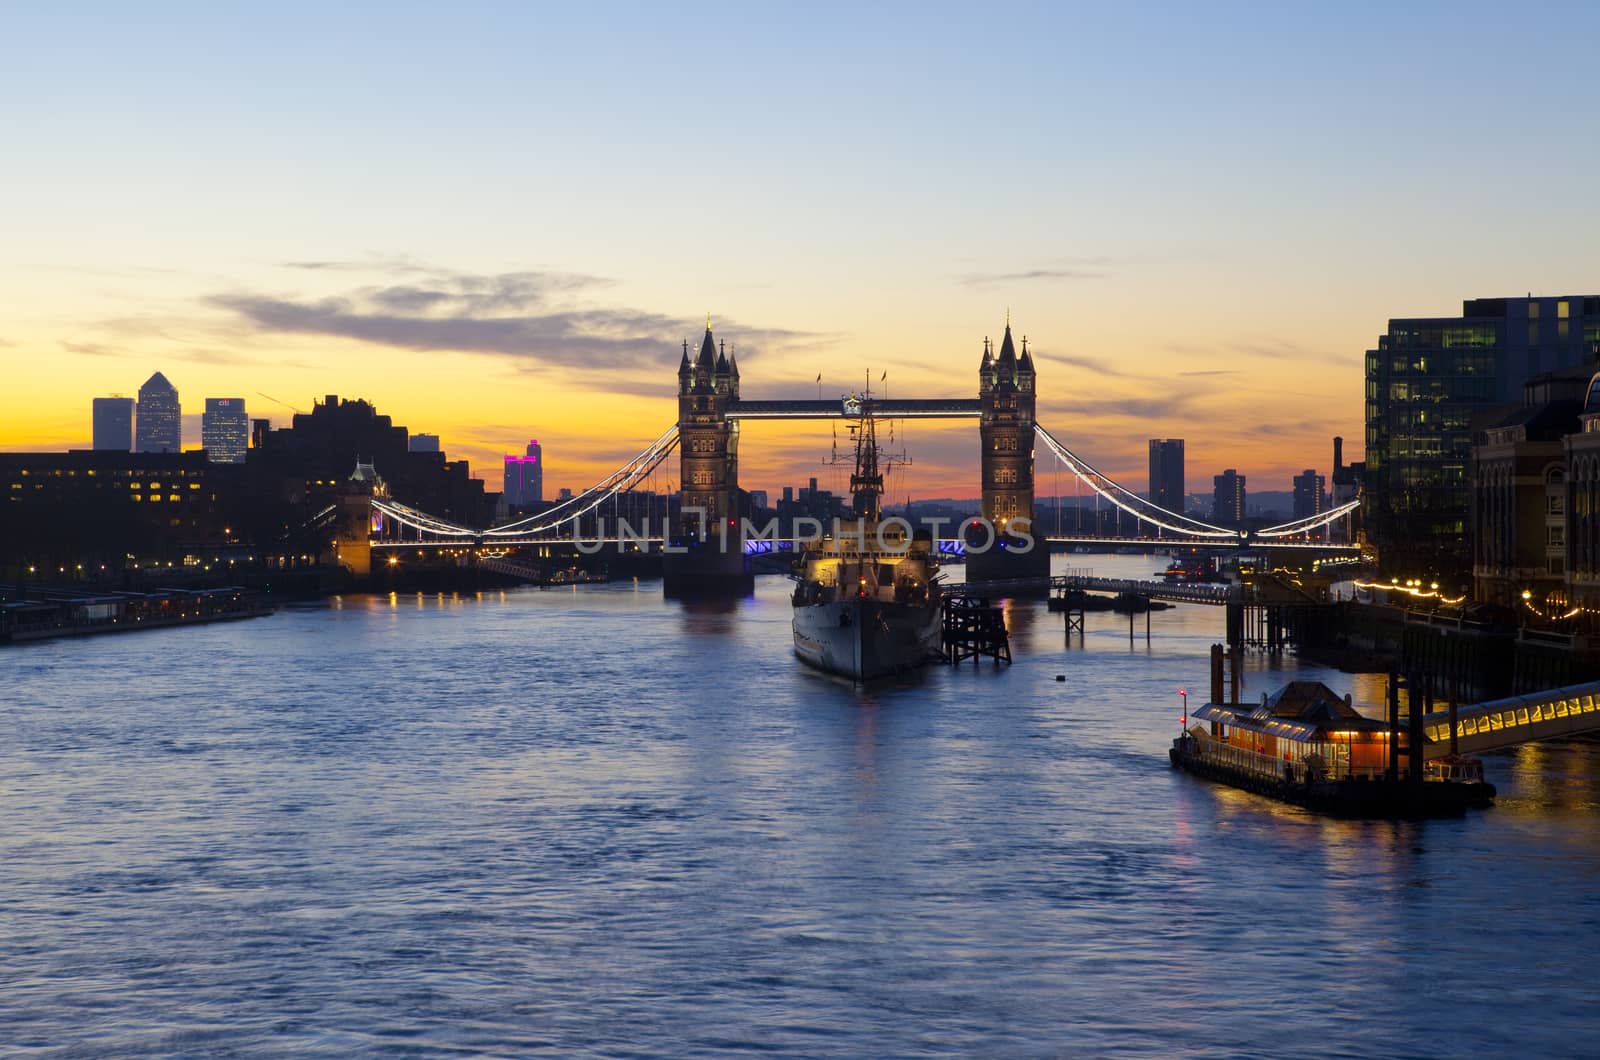 London sunrise with Tower Bridge, HMS Belfast and the River Thames in the foreground.